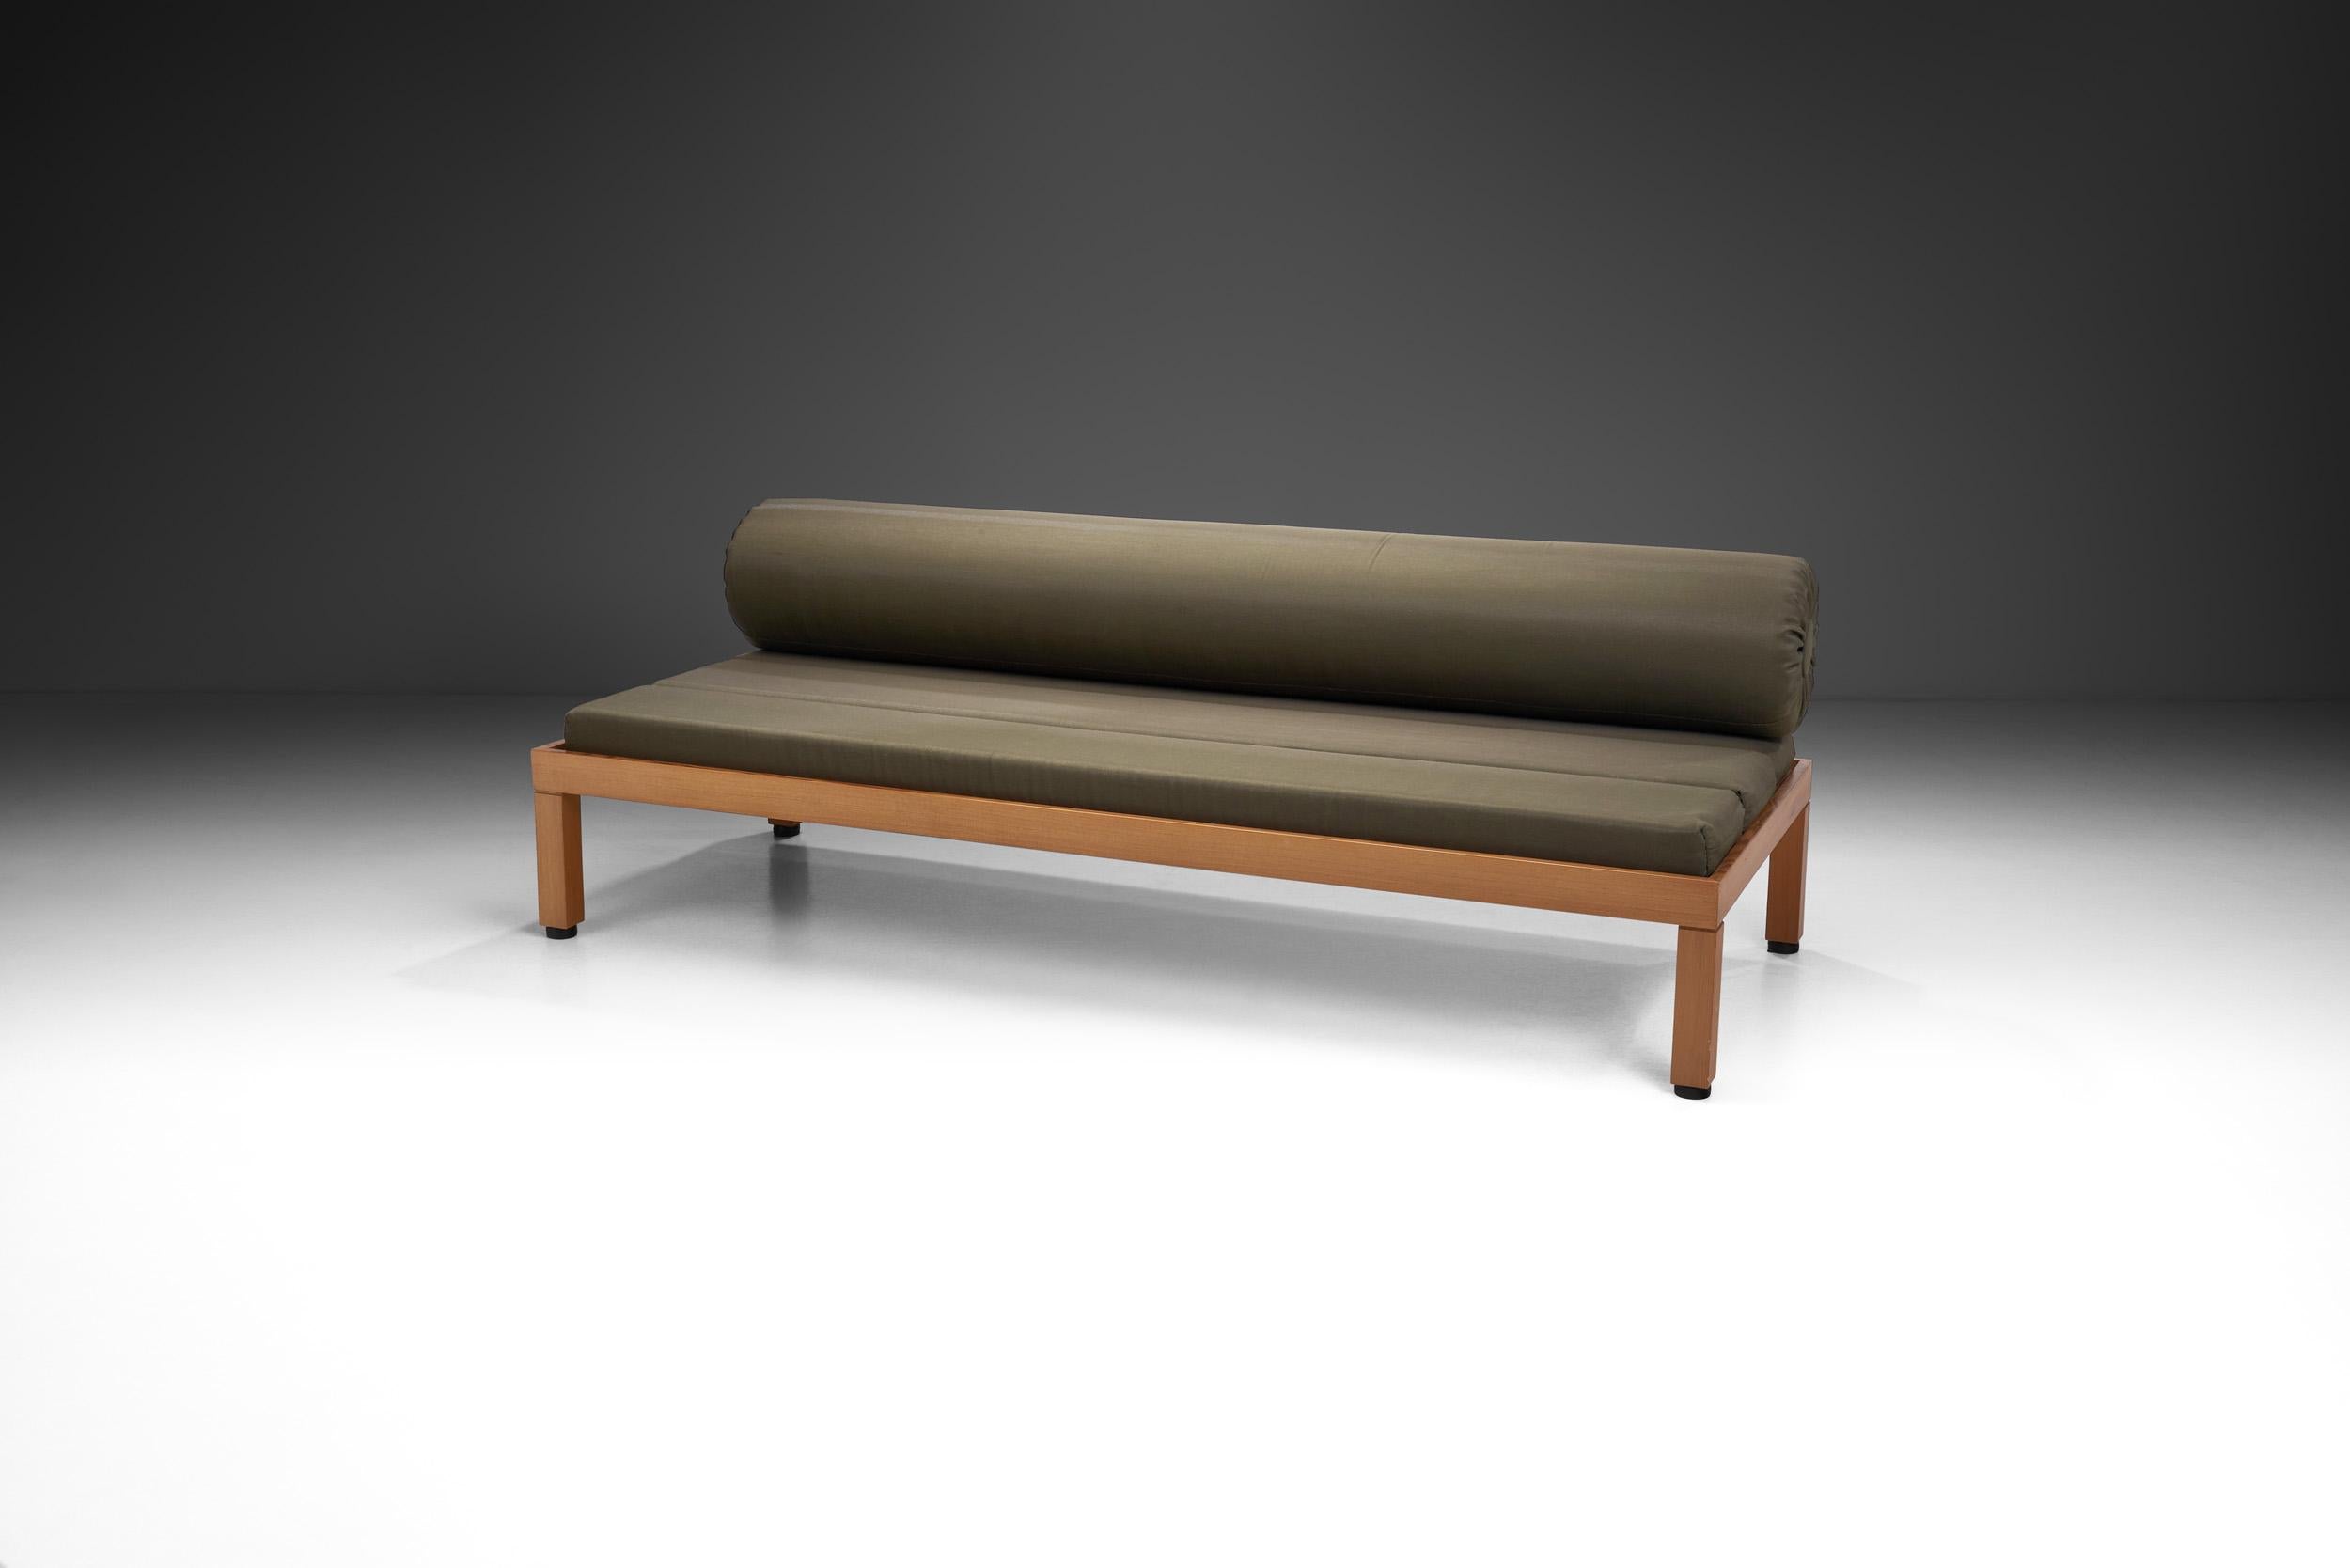 Finnish A Haroma, Saarinen, and Salo Design Collaboration Daybed, Finland 1960 For Sale